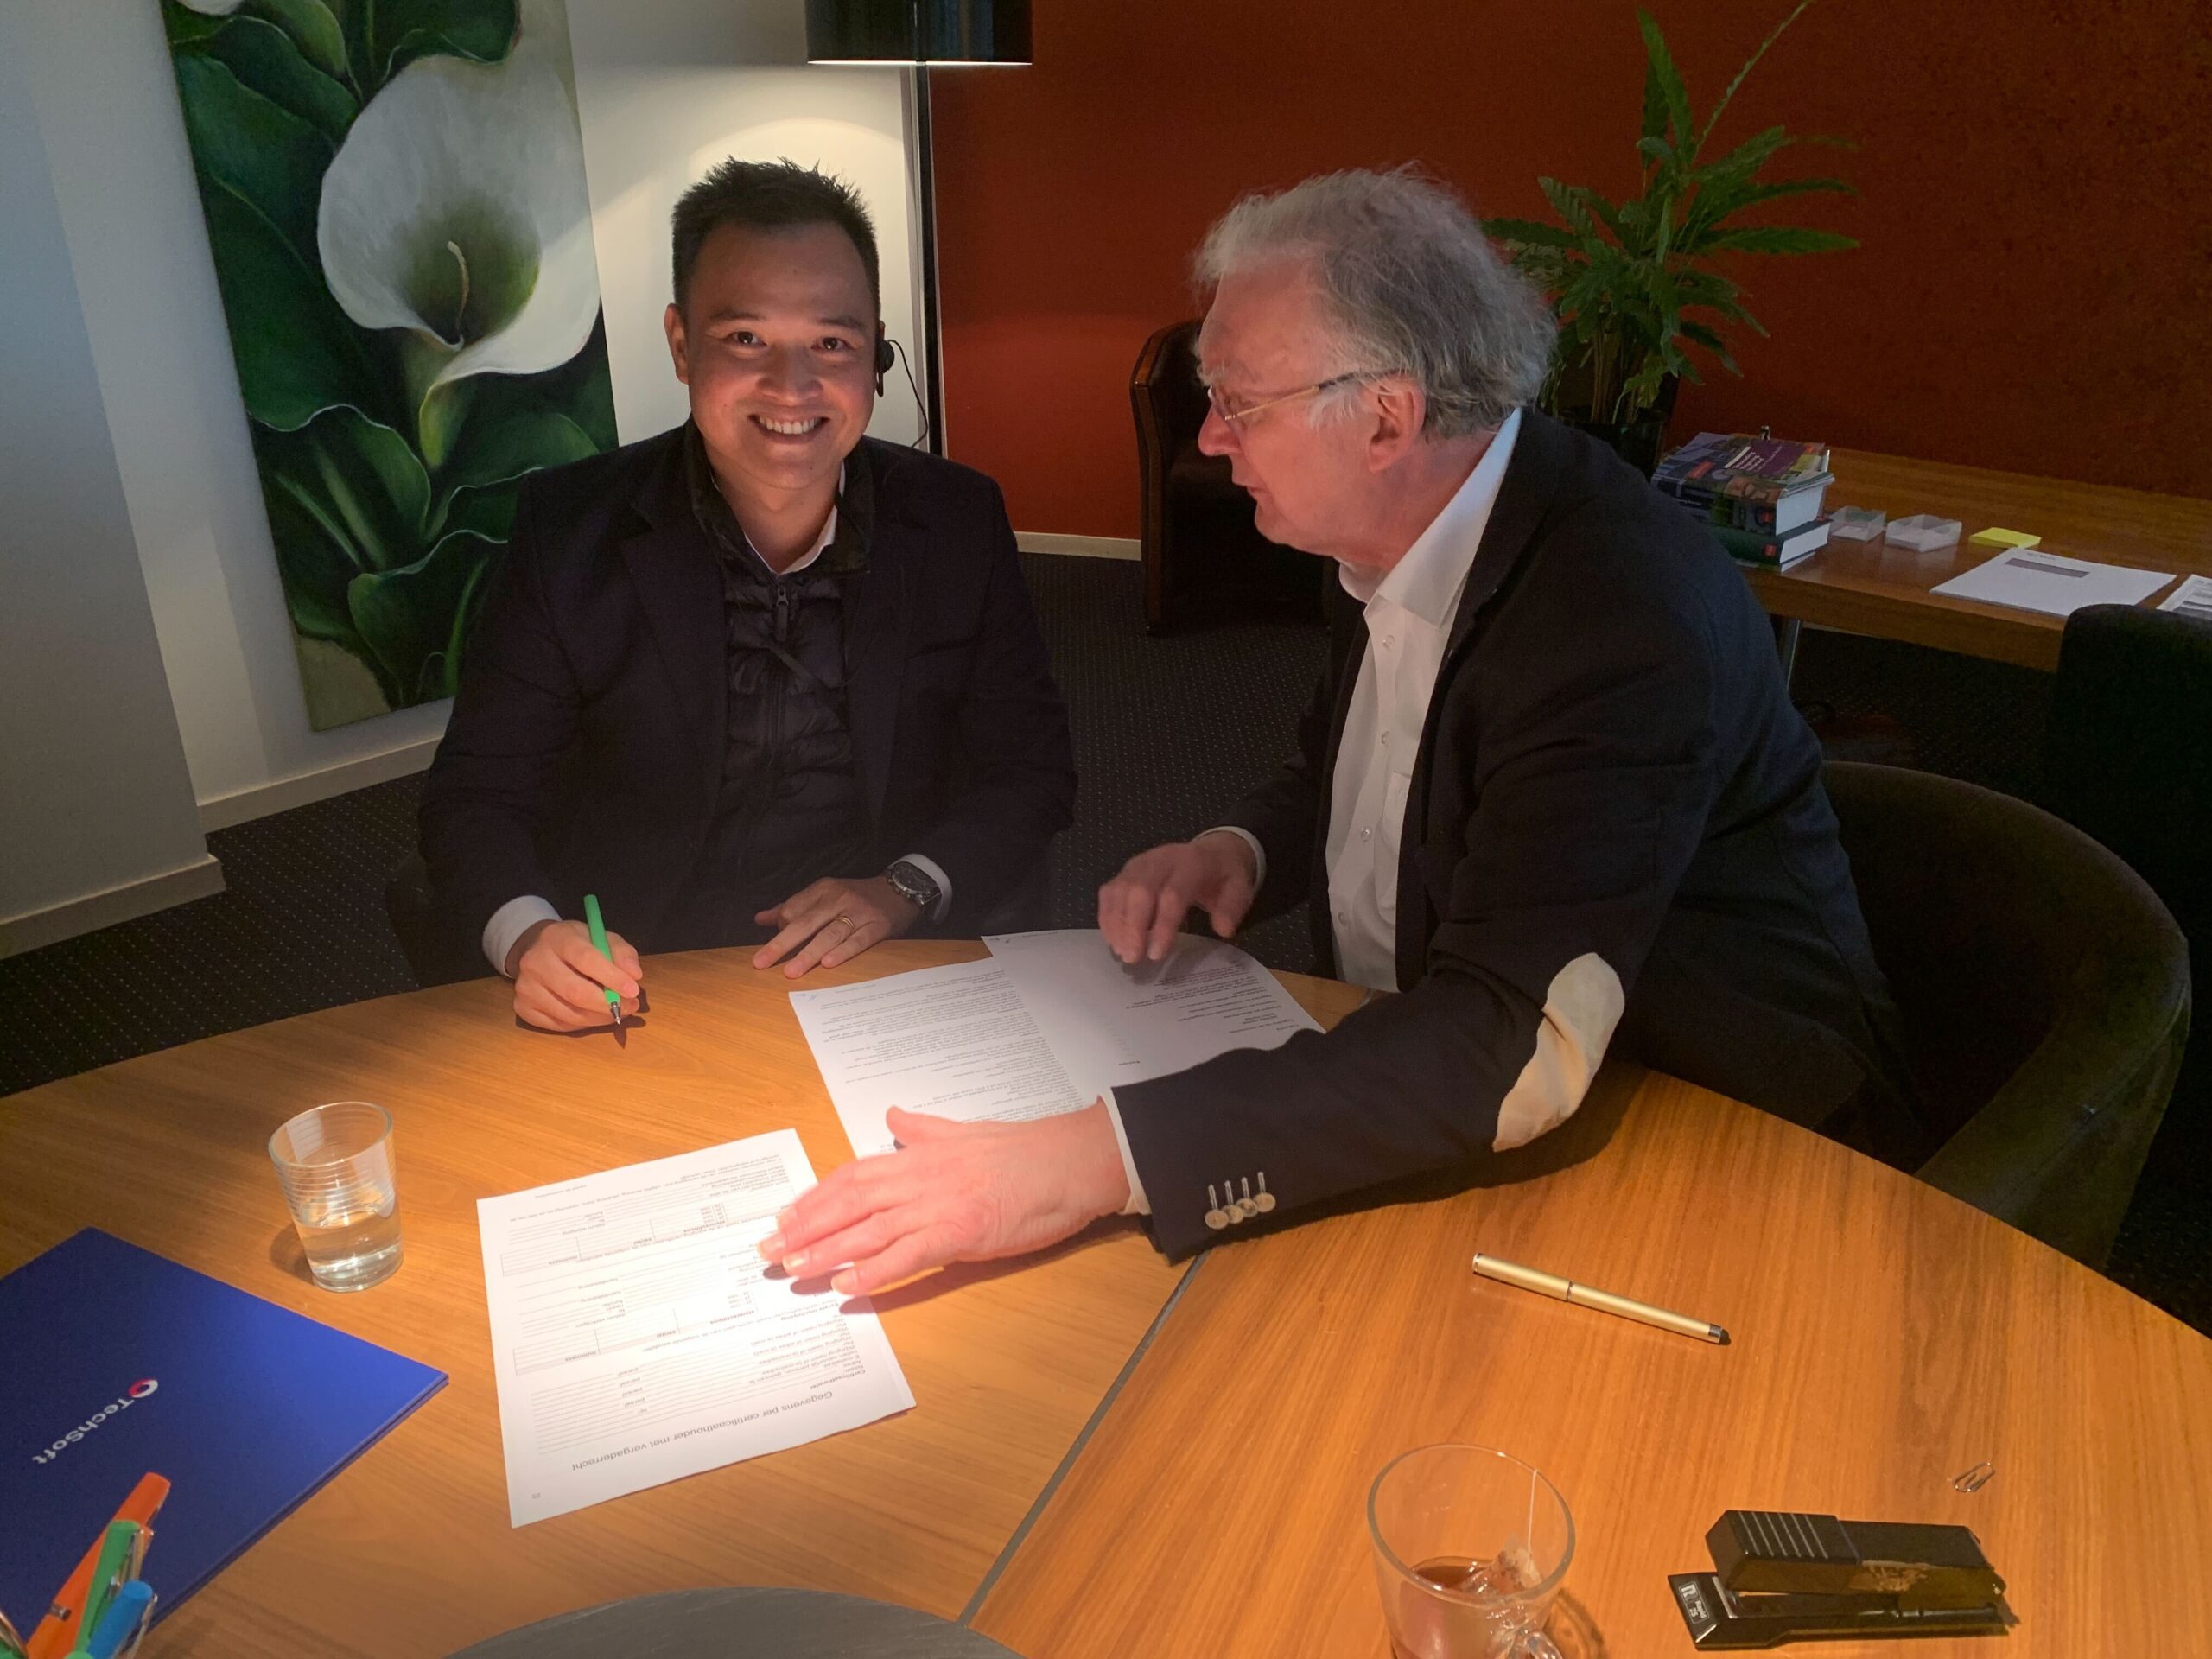 The establishment of TechSoft in the Netherlands